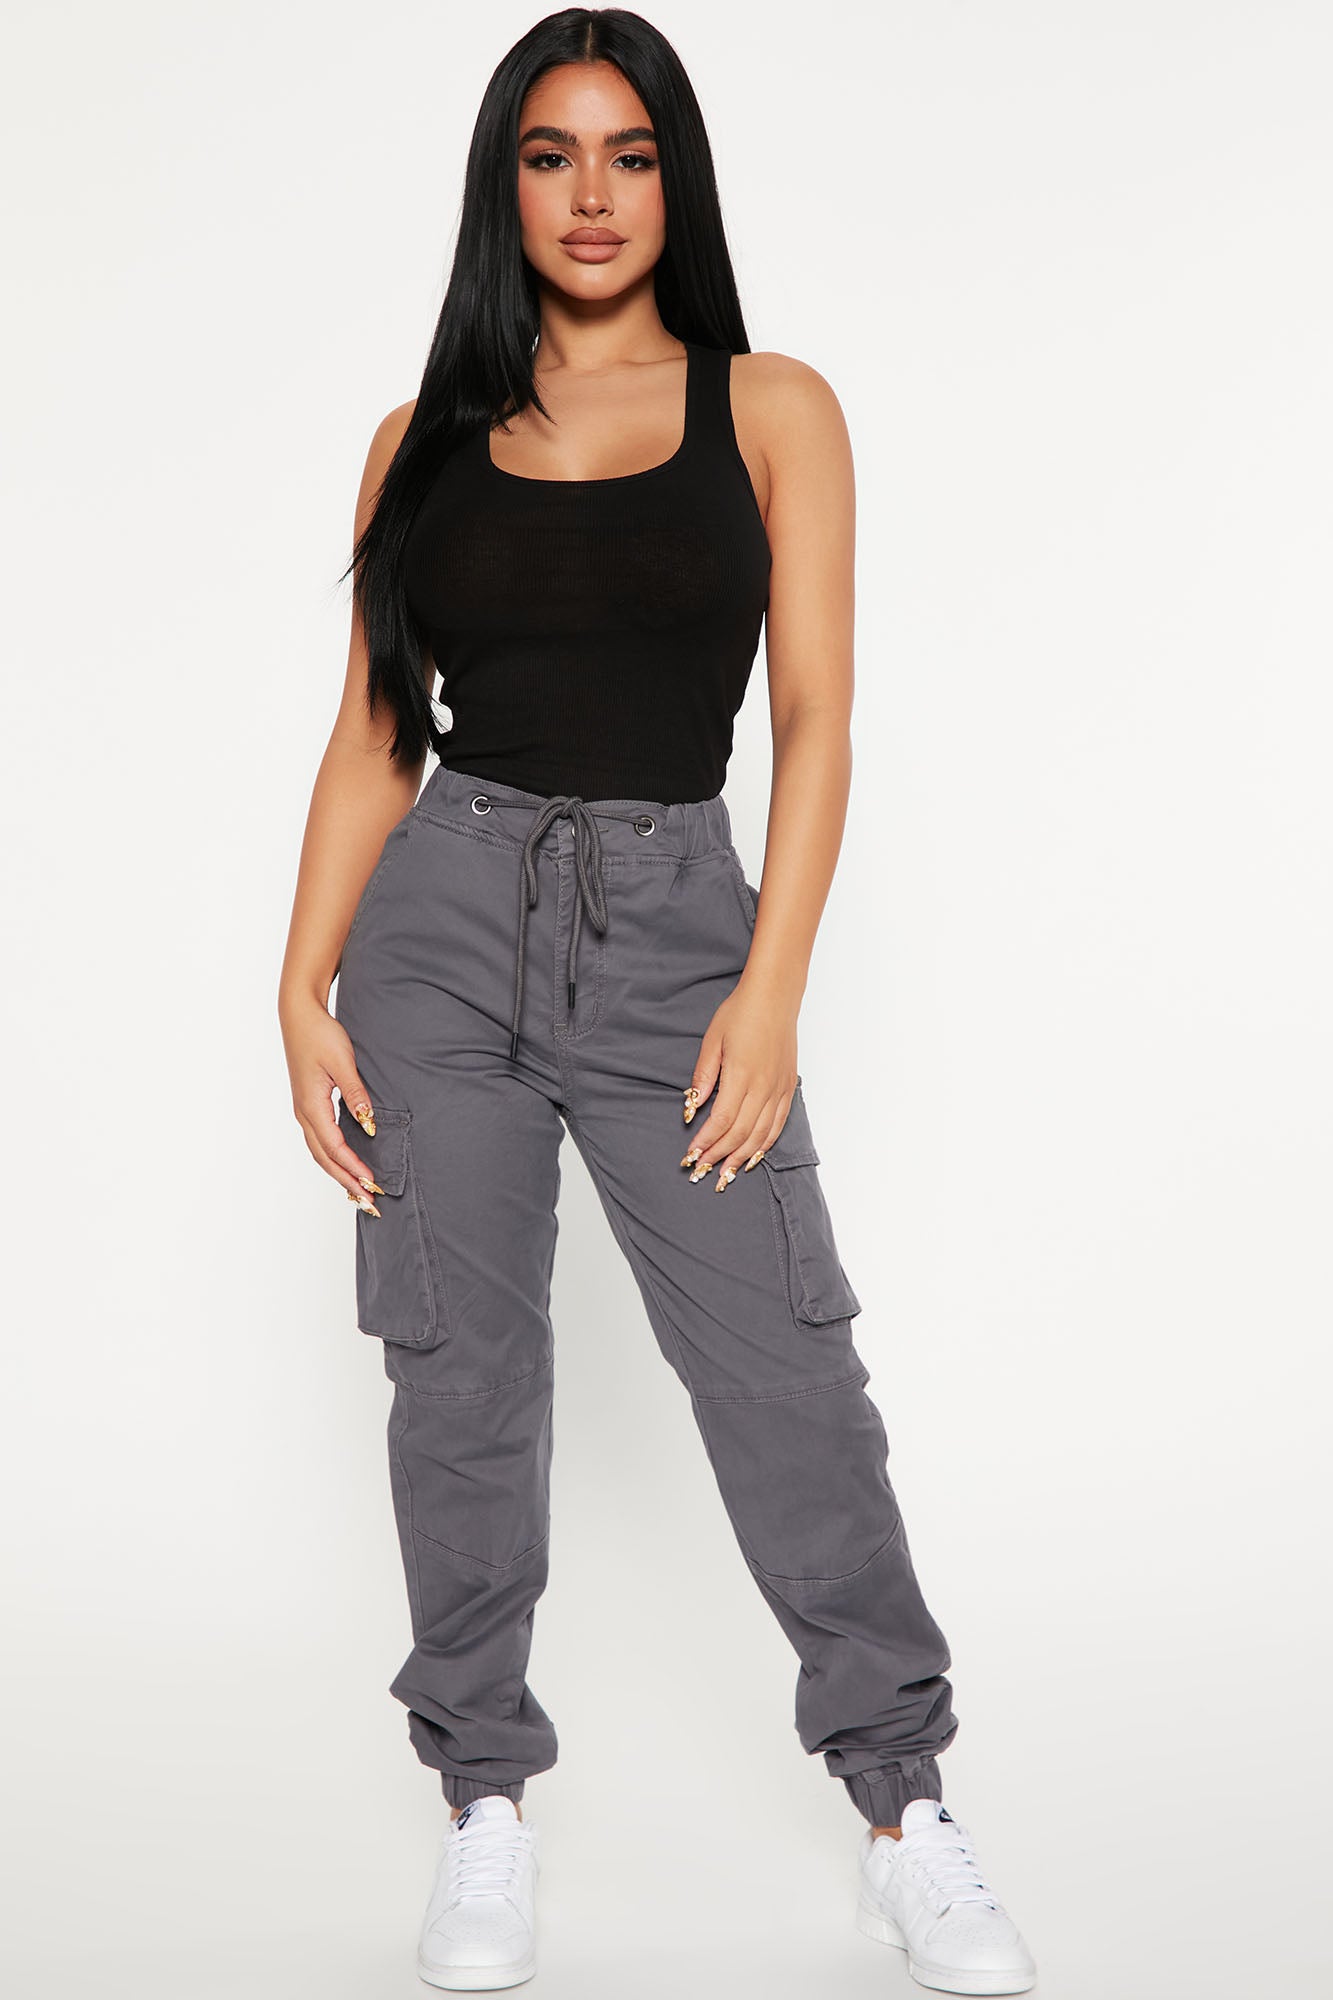 Grey High Waisted Butterfly Print Zip-Up Flare Cargo Pants - Grey / M |  Pants for women, High waisted flares, Pretty outfits